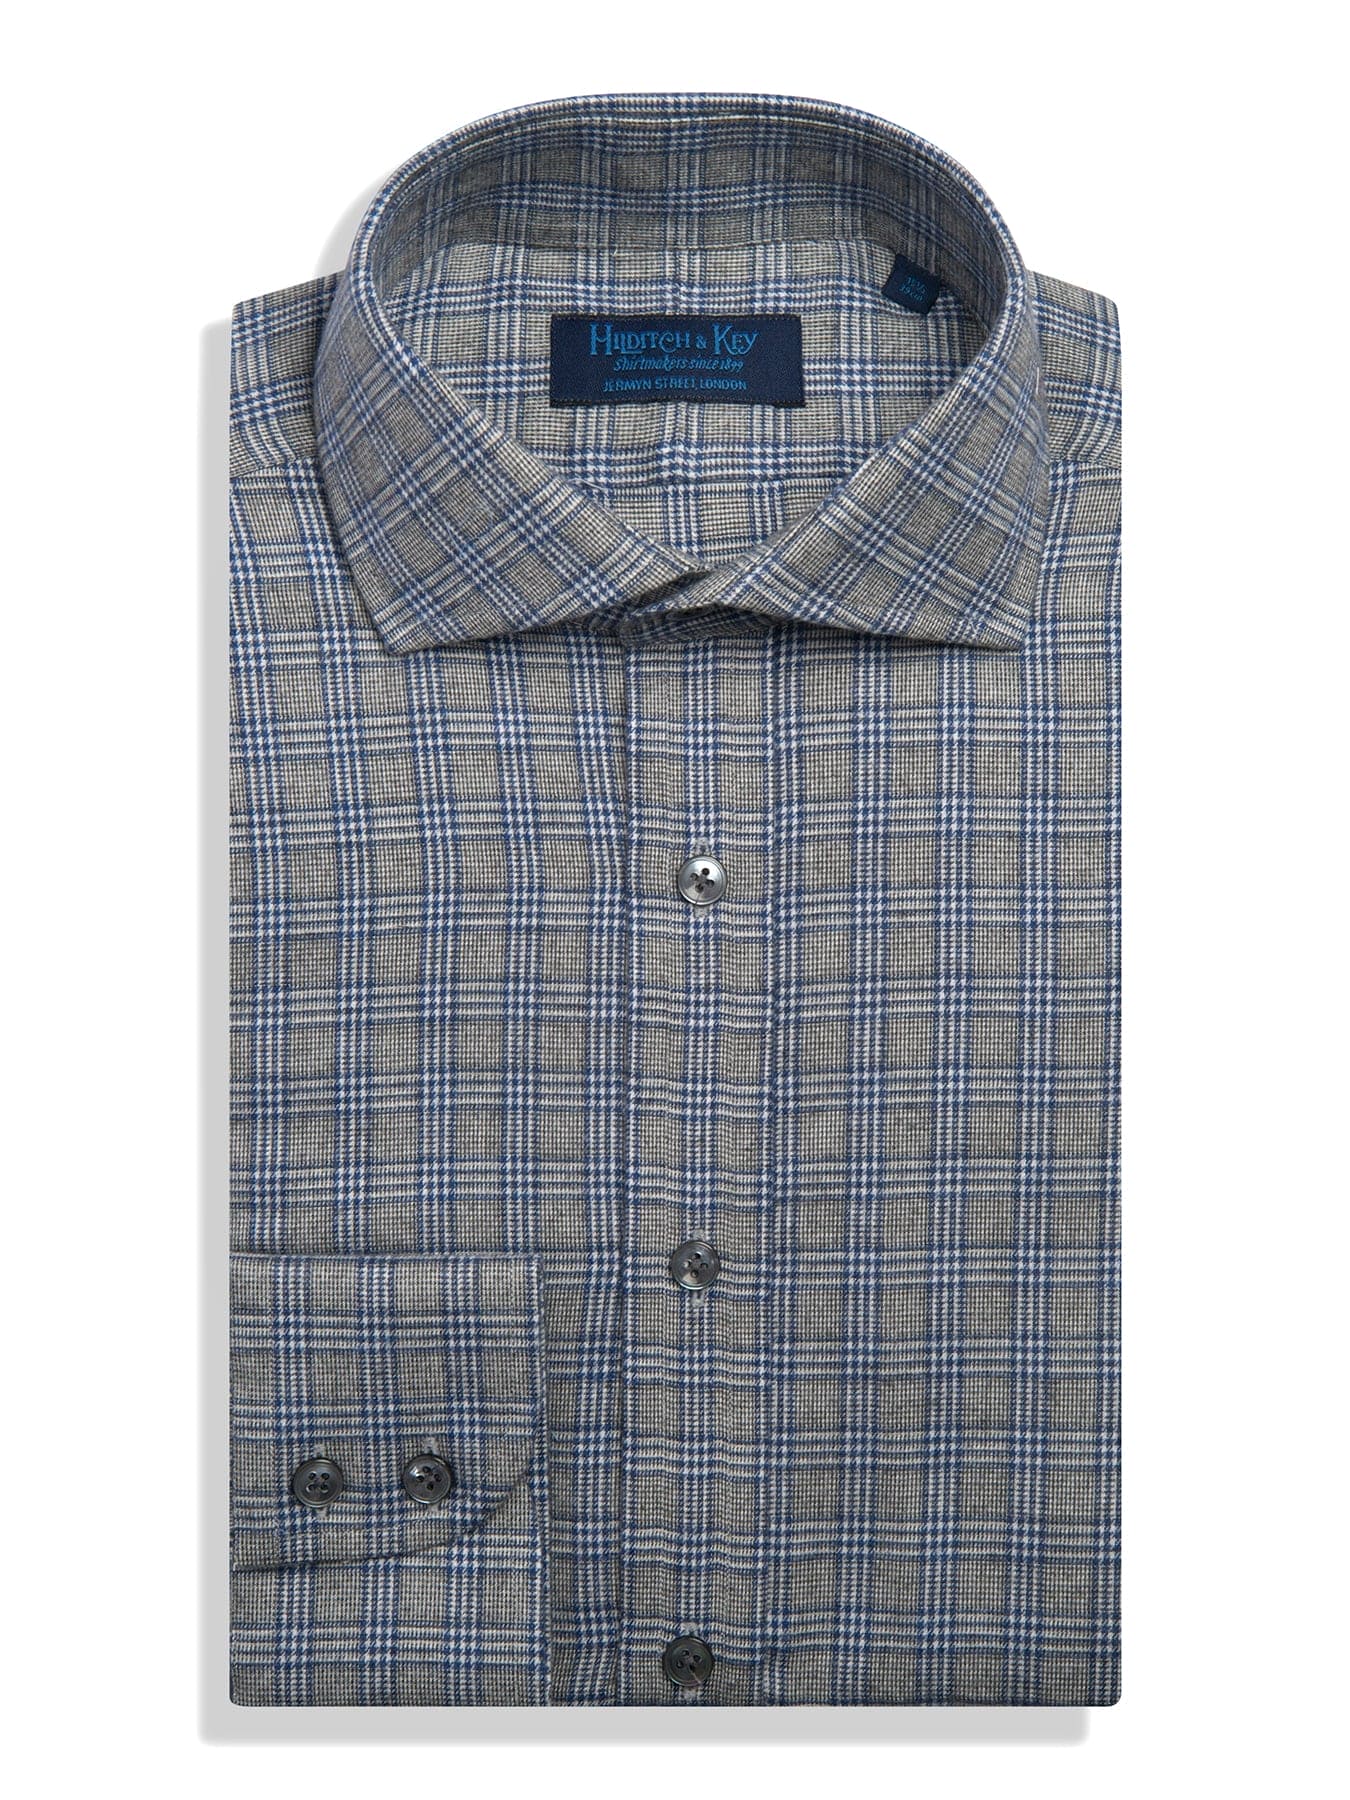 Contemporary Fit, Cutaway Collar, Two Button Cuff in Grey, Blue & White Check